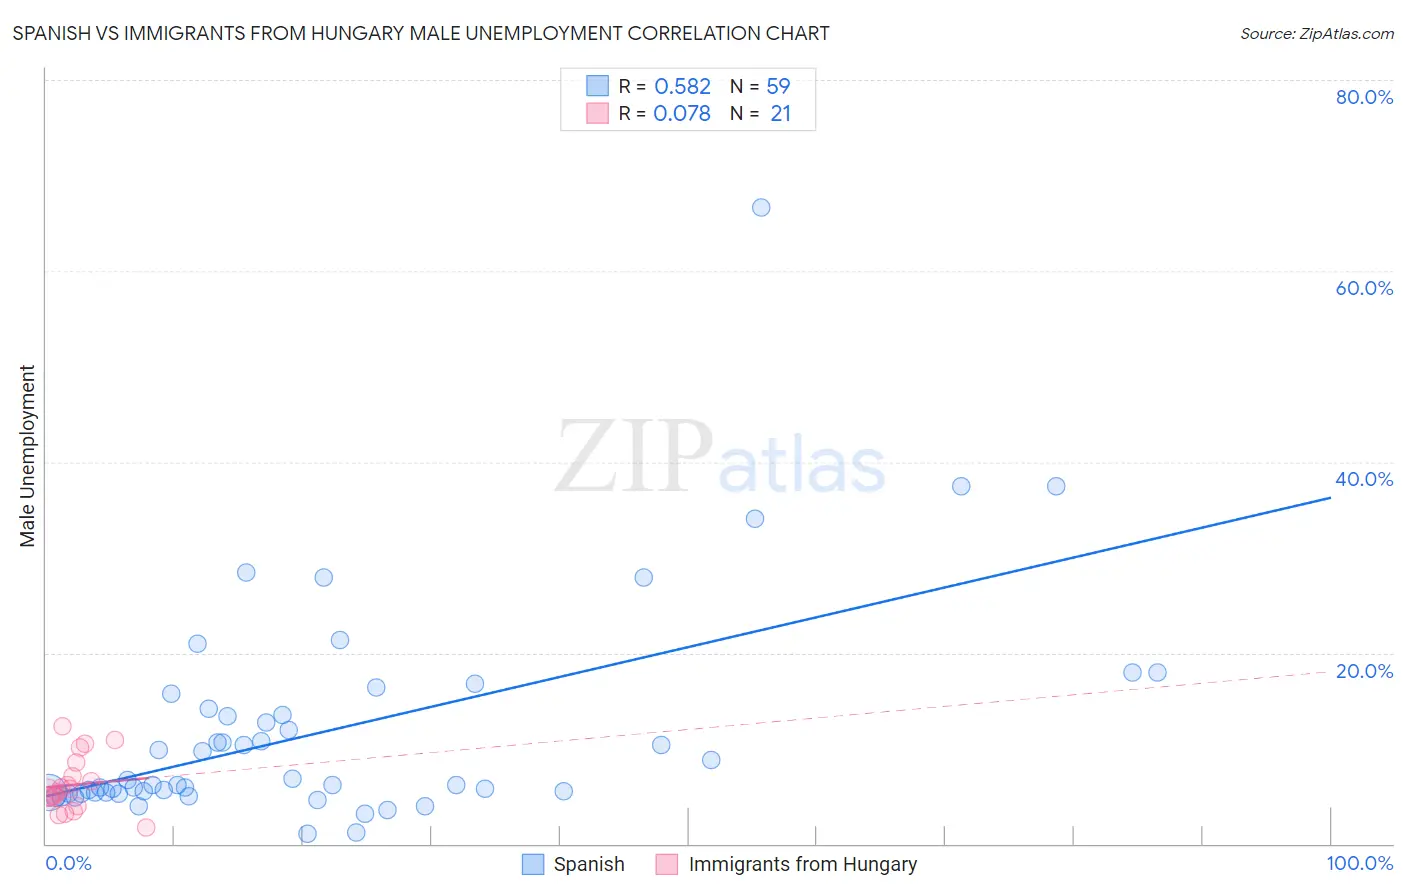 Spanish vs Immigrants from Hungary Male Unemployment